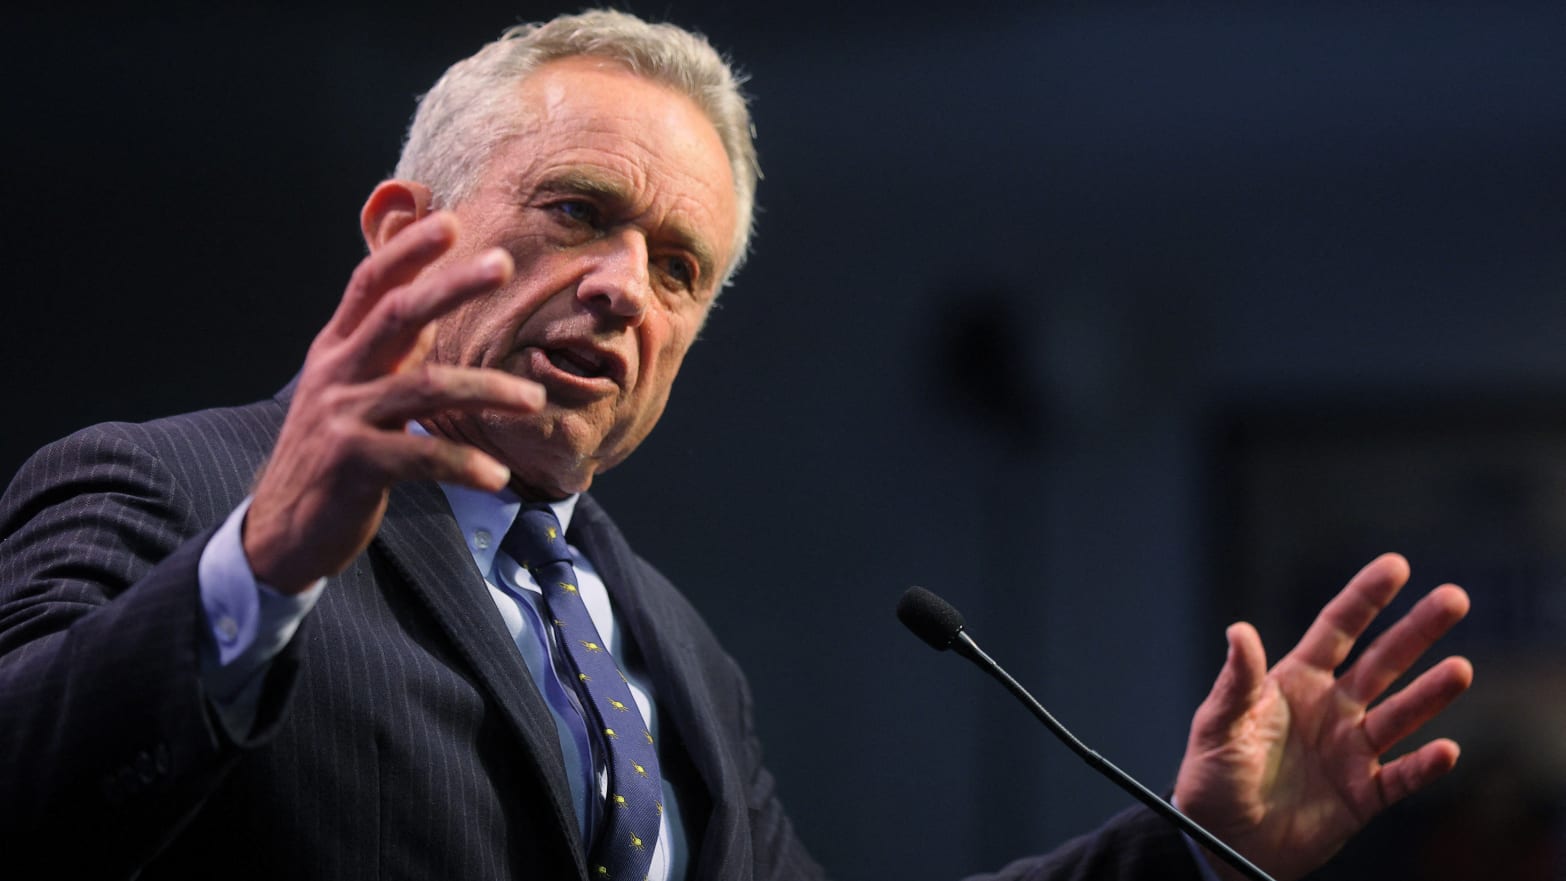 Robert F. Kennedy Jr. speaks at the NH Institute of Politics at St. Anselm College in Manchester, New Hampshire